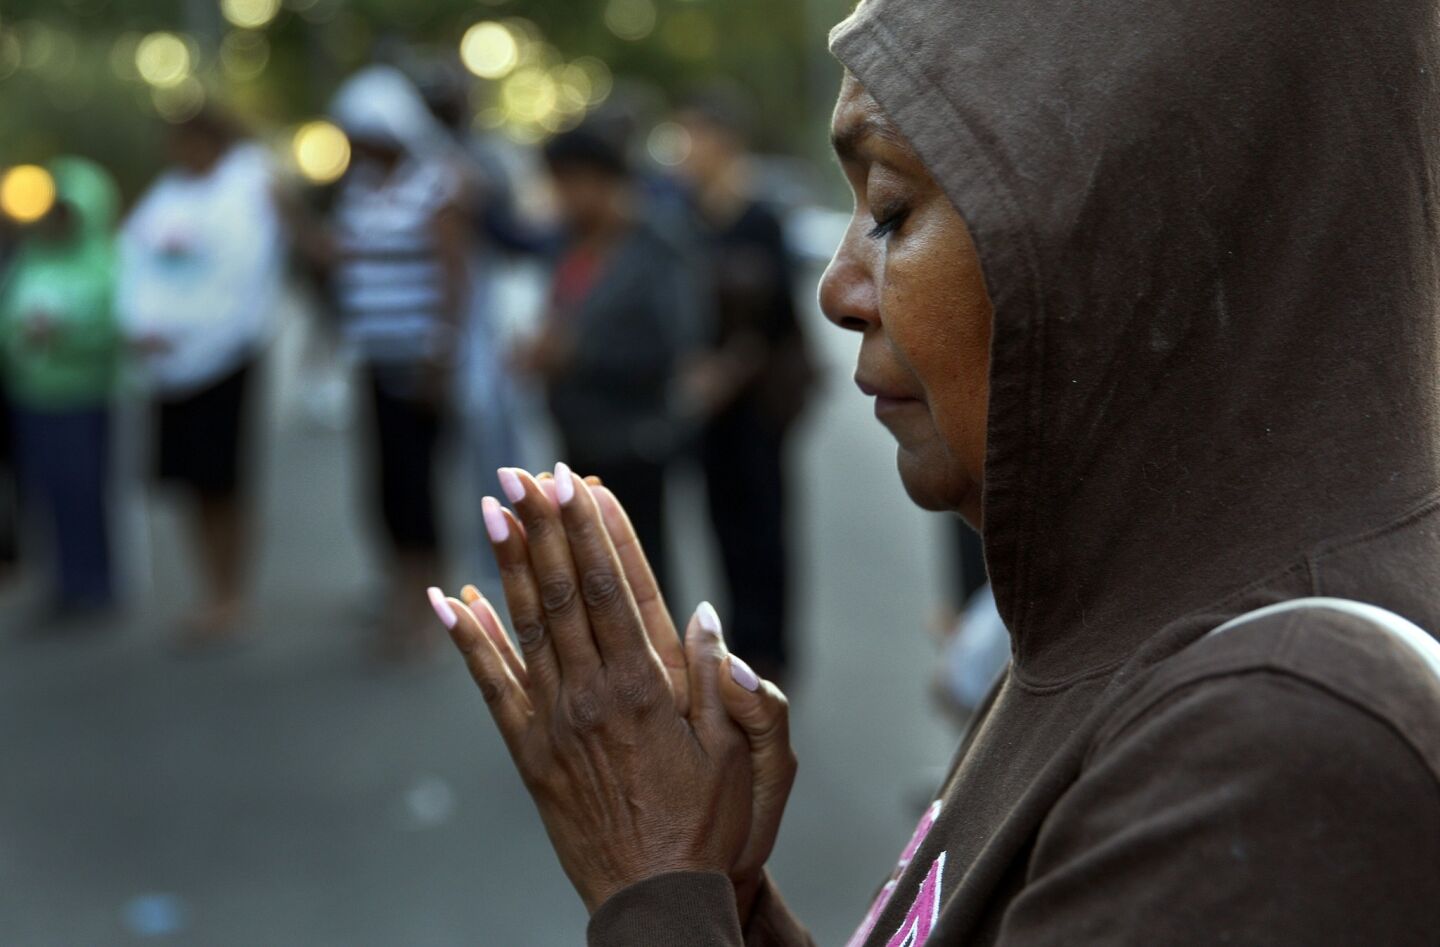 Alicia Dhanifu, wearing a hoodie in support of slain teenager Trayvon Martin, prays during a demonstration in Pasadena.